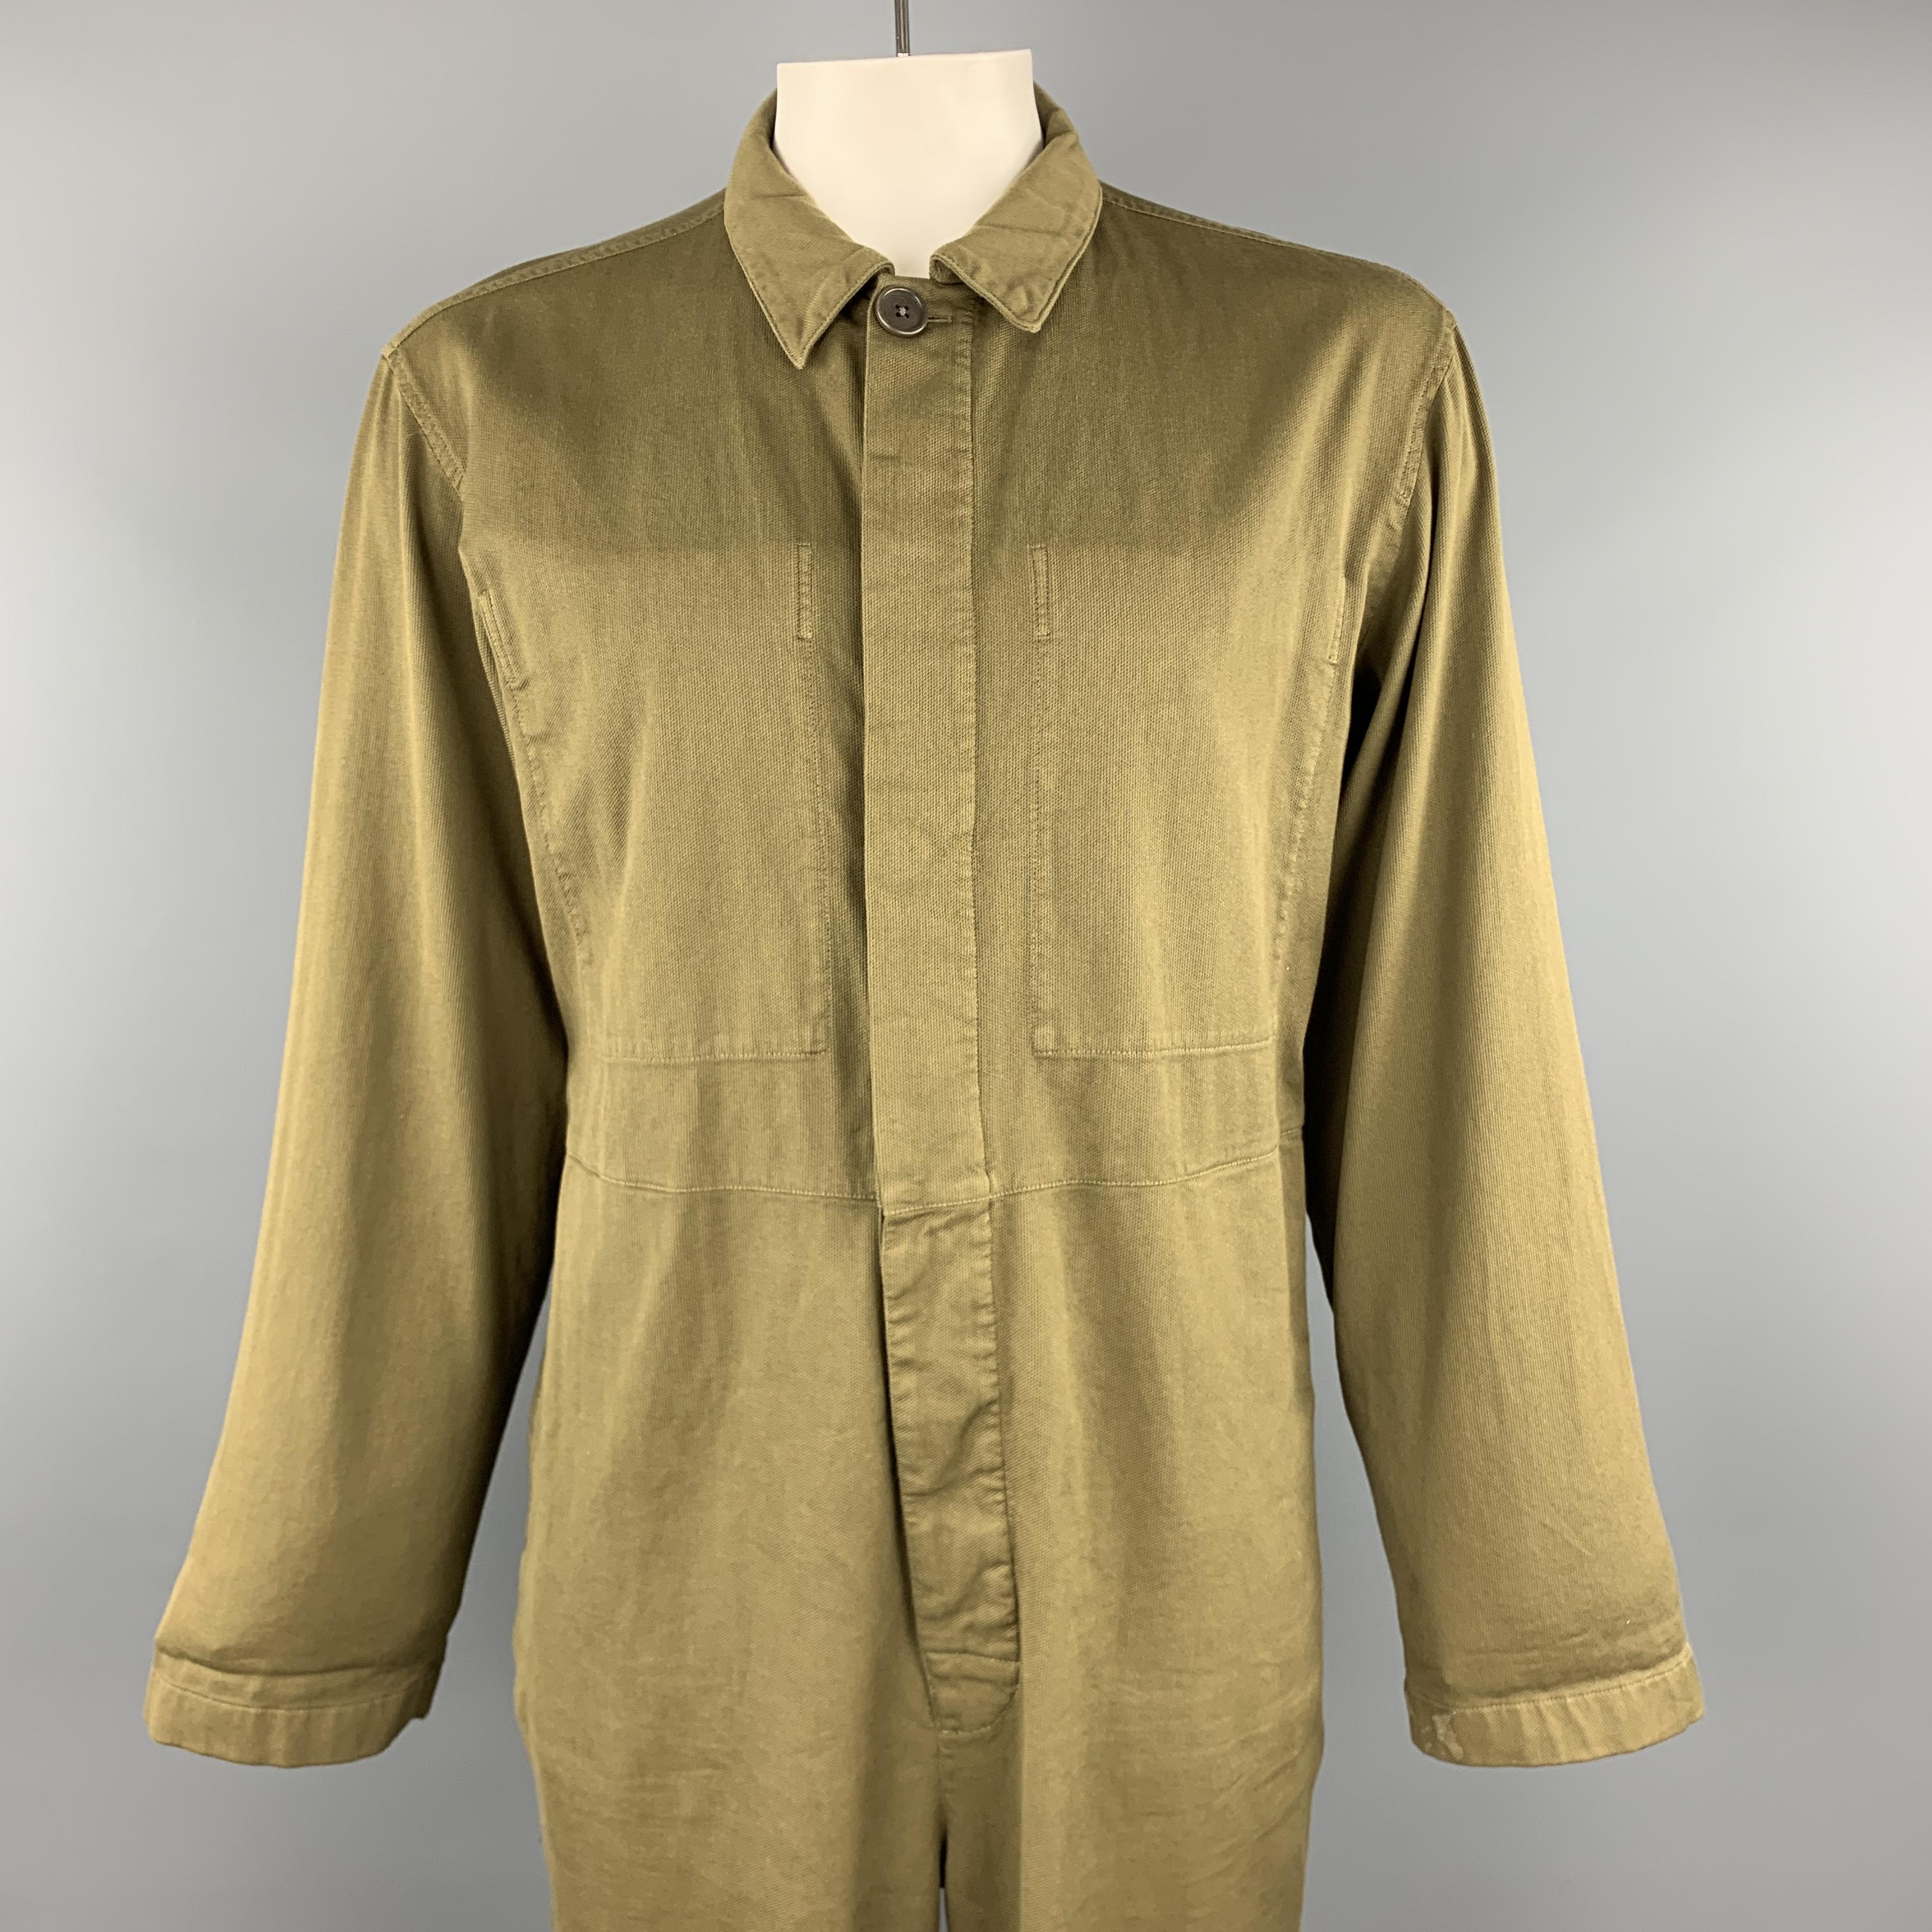 DRIES VAN NOTEN jumpsuit comes in olive cotton canvas with a pointed collar, inner breast pockets, and hidden placket button front. Made in Bulgaria.

Excellent Pre-Owned Condition.
Marked: Large

Measurements:

Shoulder: 20 in.
Chest: 48 in.
Waist: